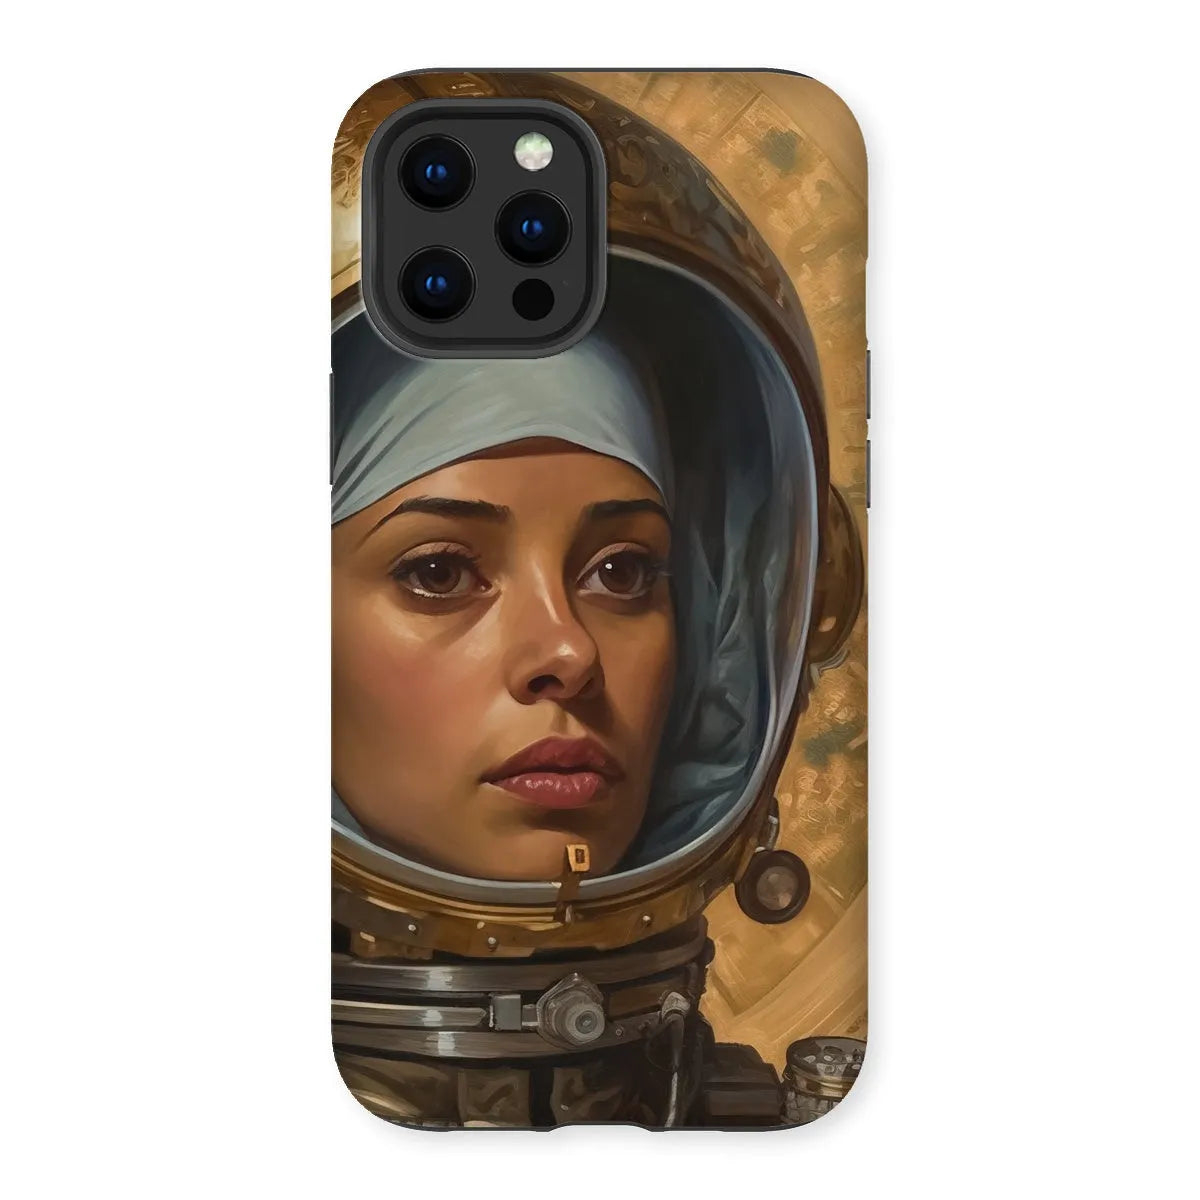 Amira The Lesbian Astronaut - Sapphic Aesthetic Phone Case - Iphone 12 Pro Max / Matte - Mobile Phone Cases - Aesthetic